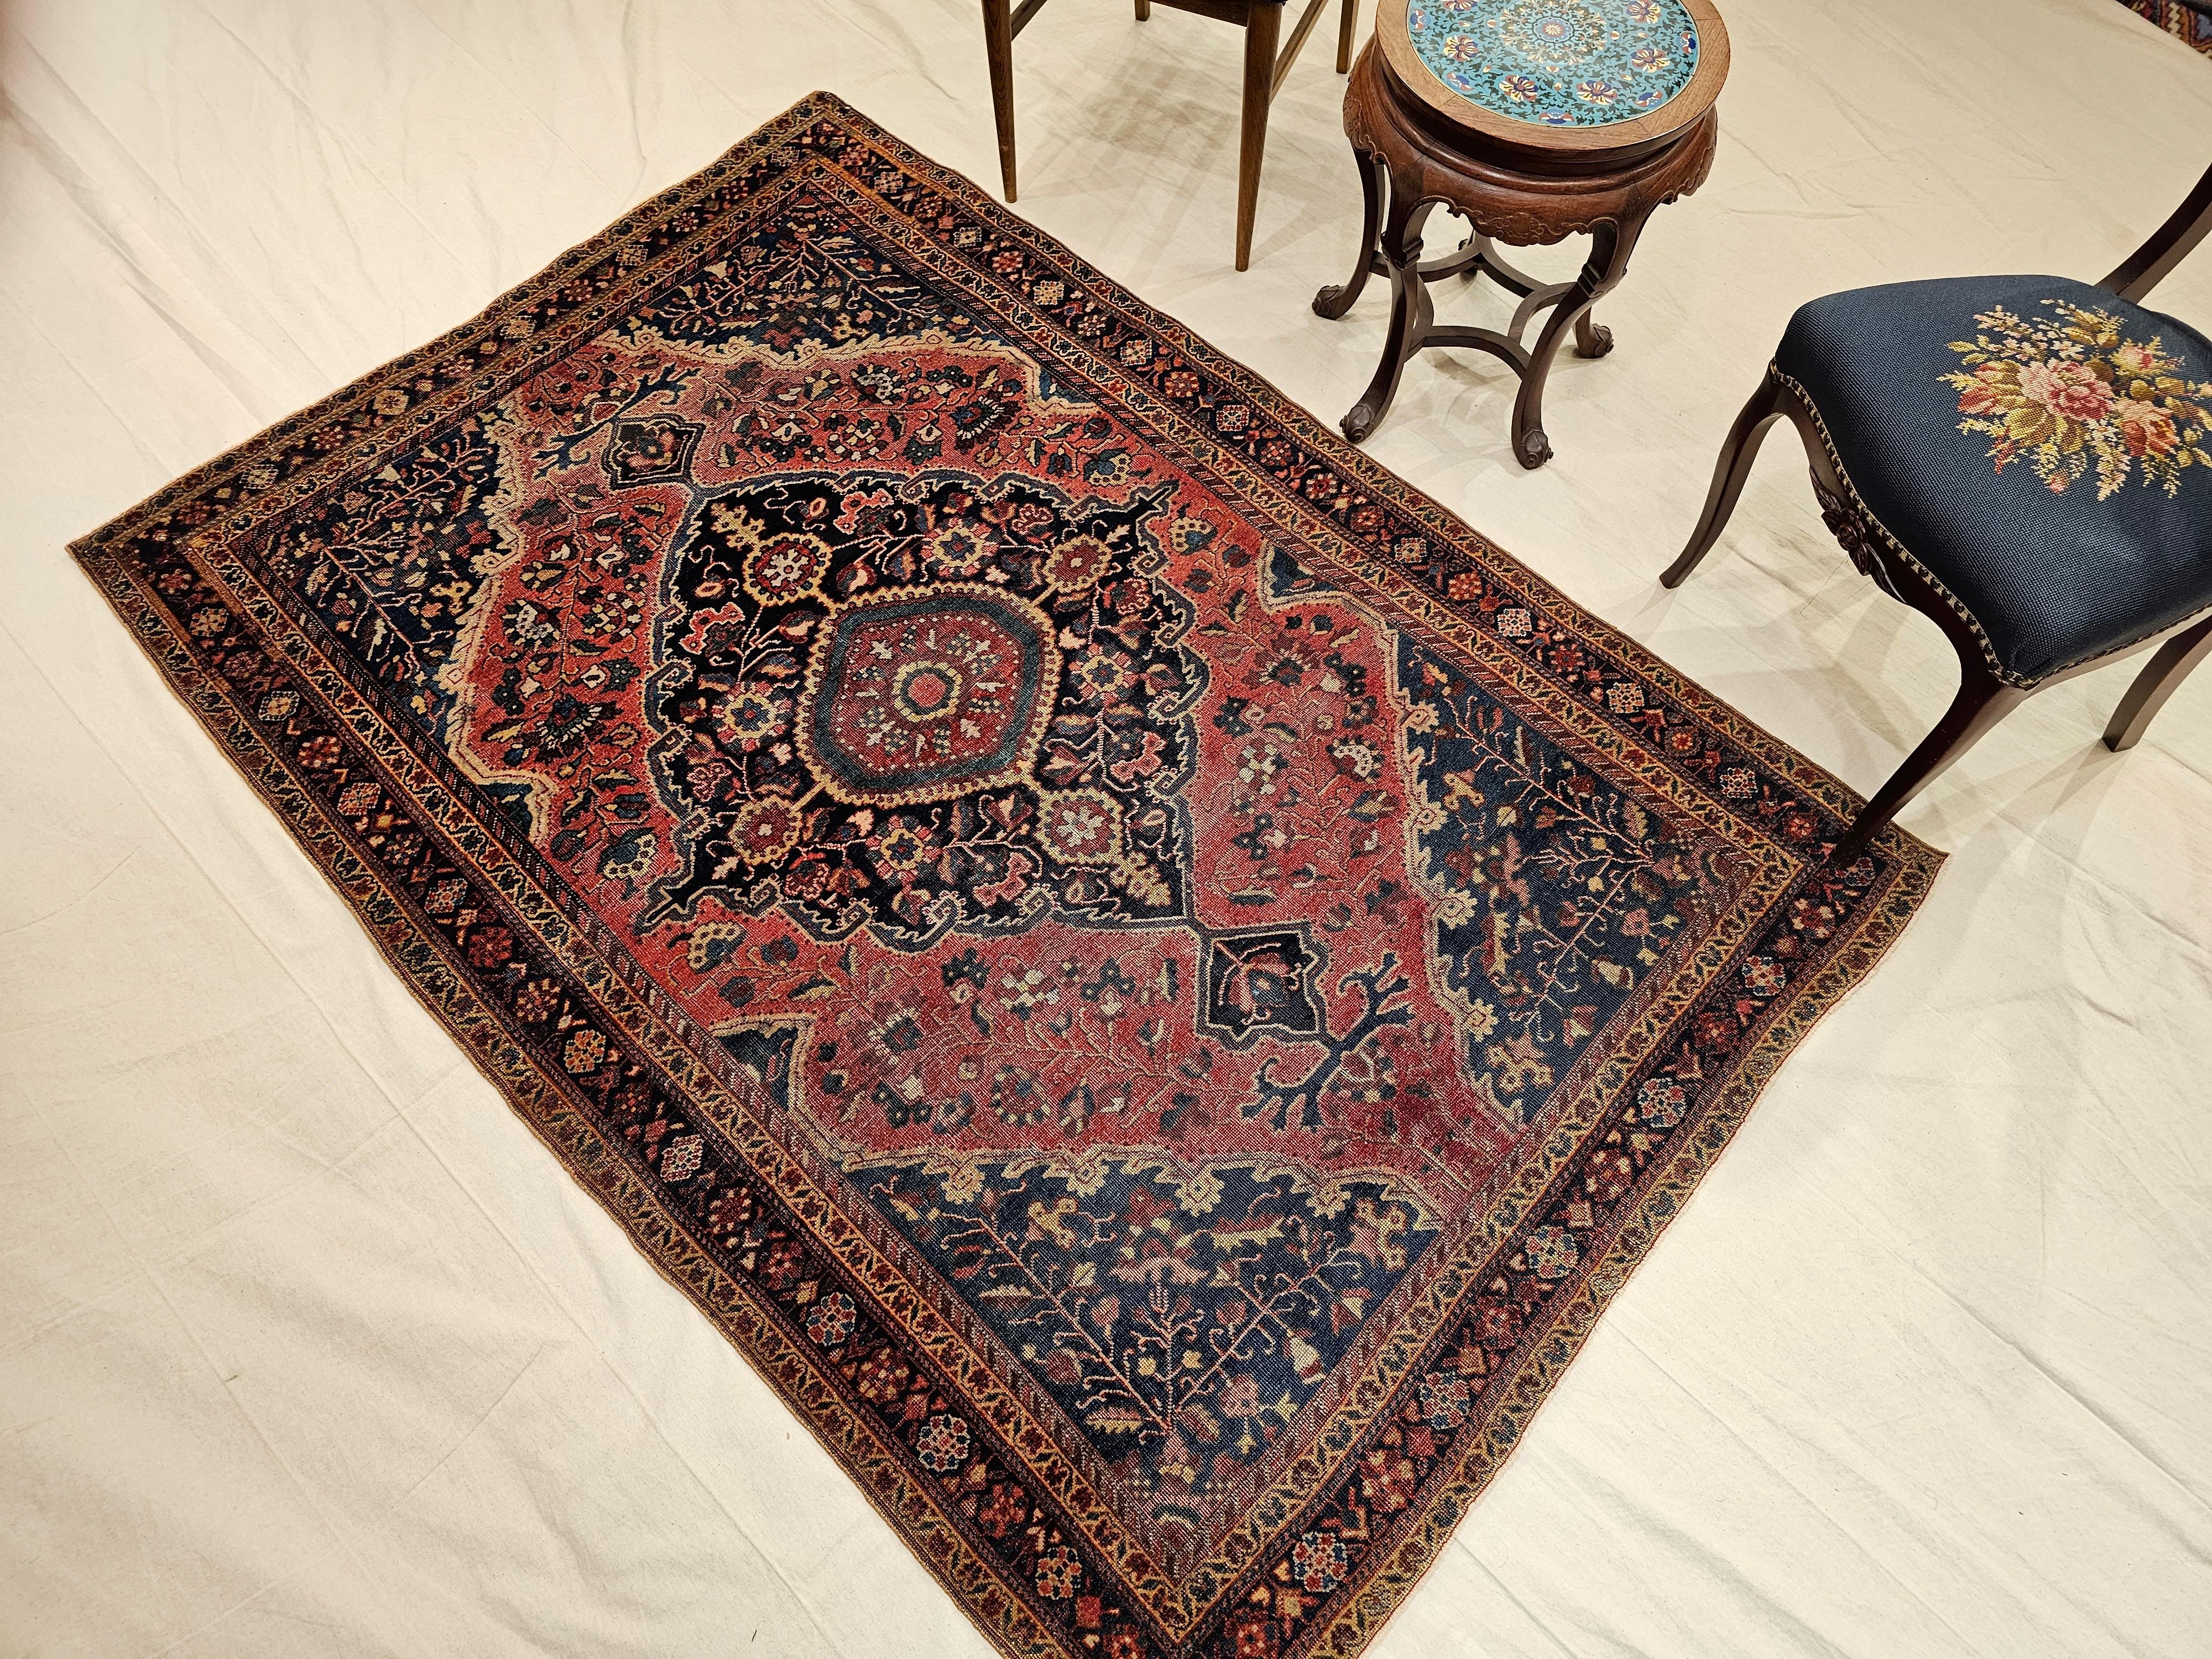 19th Century Persian Farahan Sarouk Area Rug in Rust Red, French Blue, Navy Blue For Sale 3